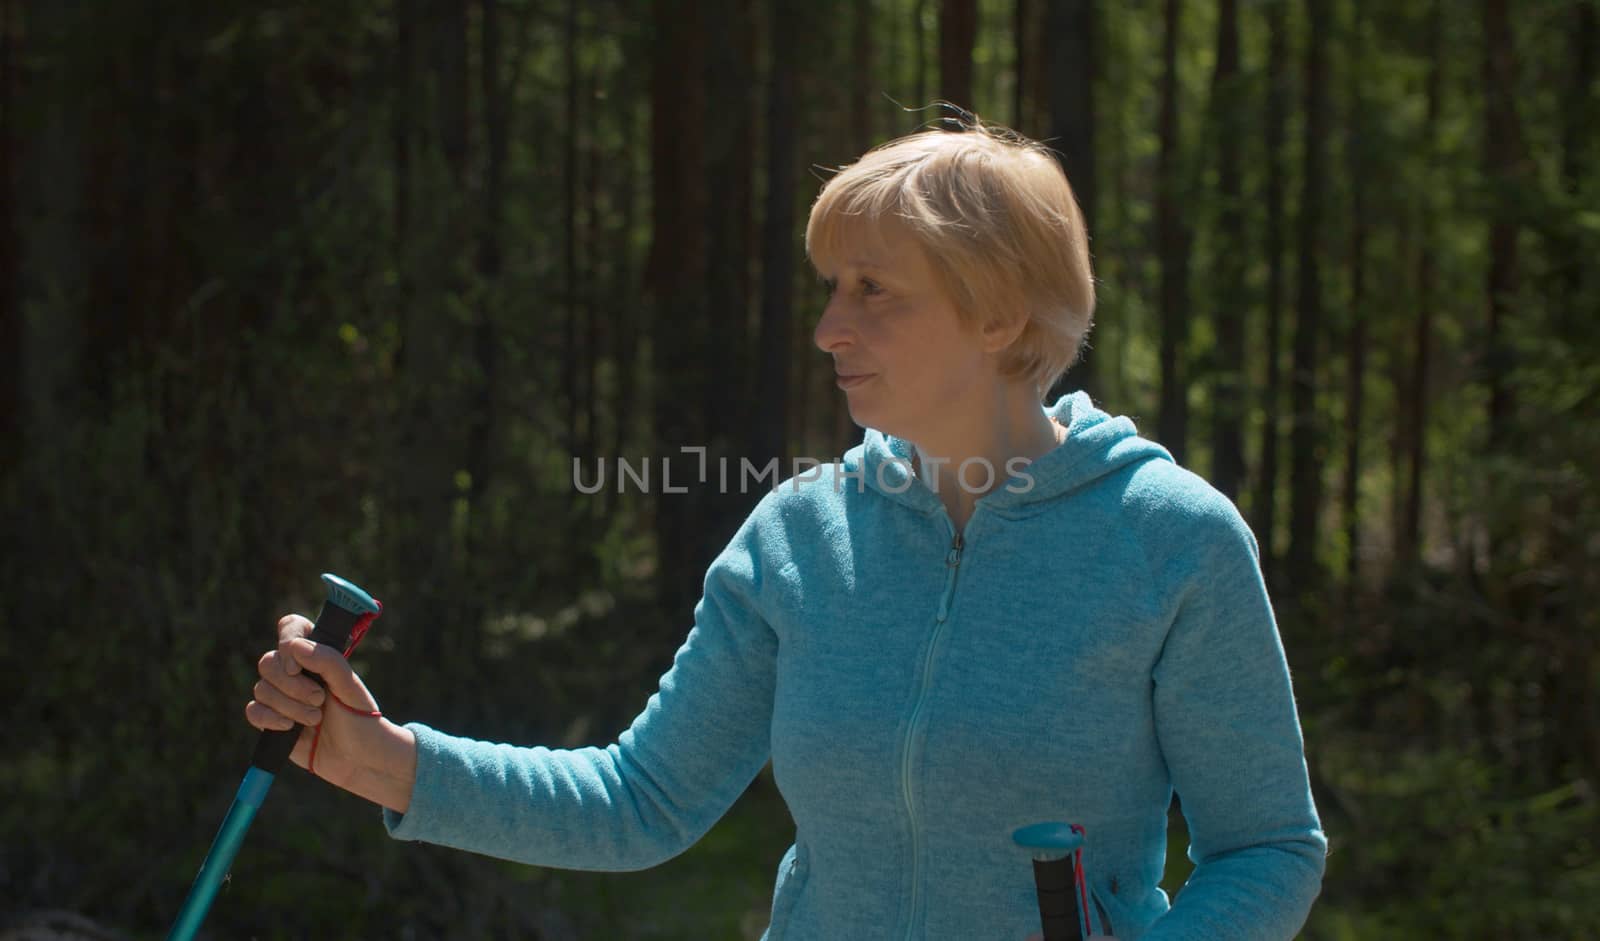 Close up portrait of mature blond woman in the forest with trekking poles. Trekking in the forest, active and healthy lifestyle concept